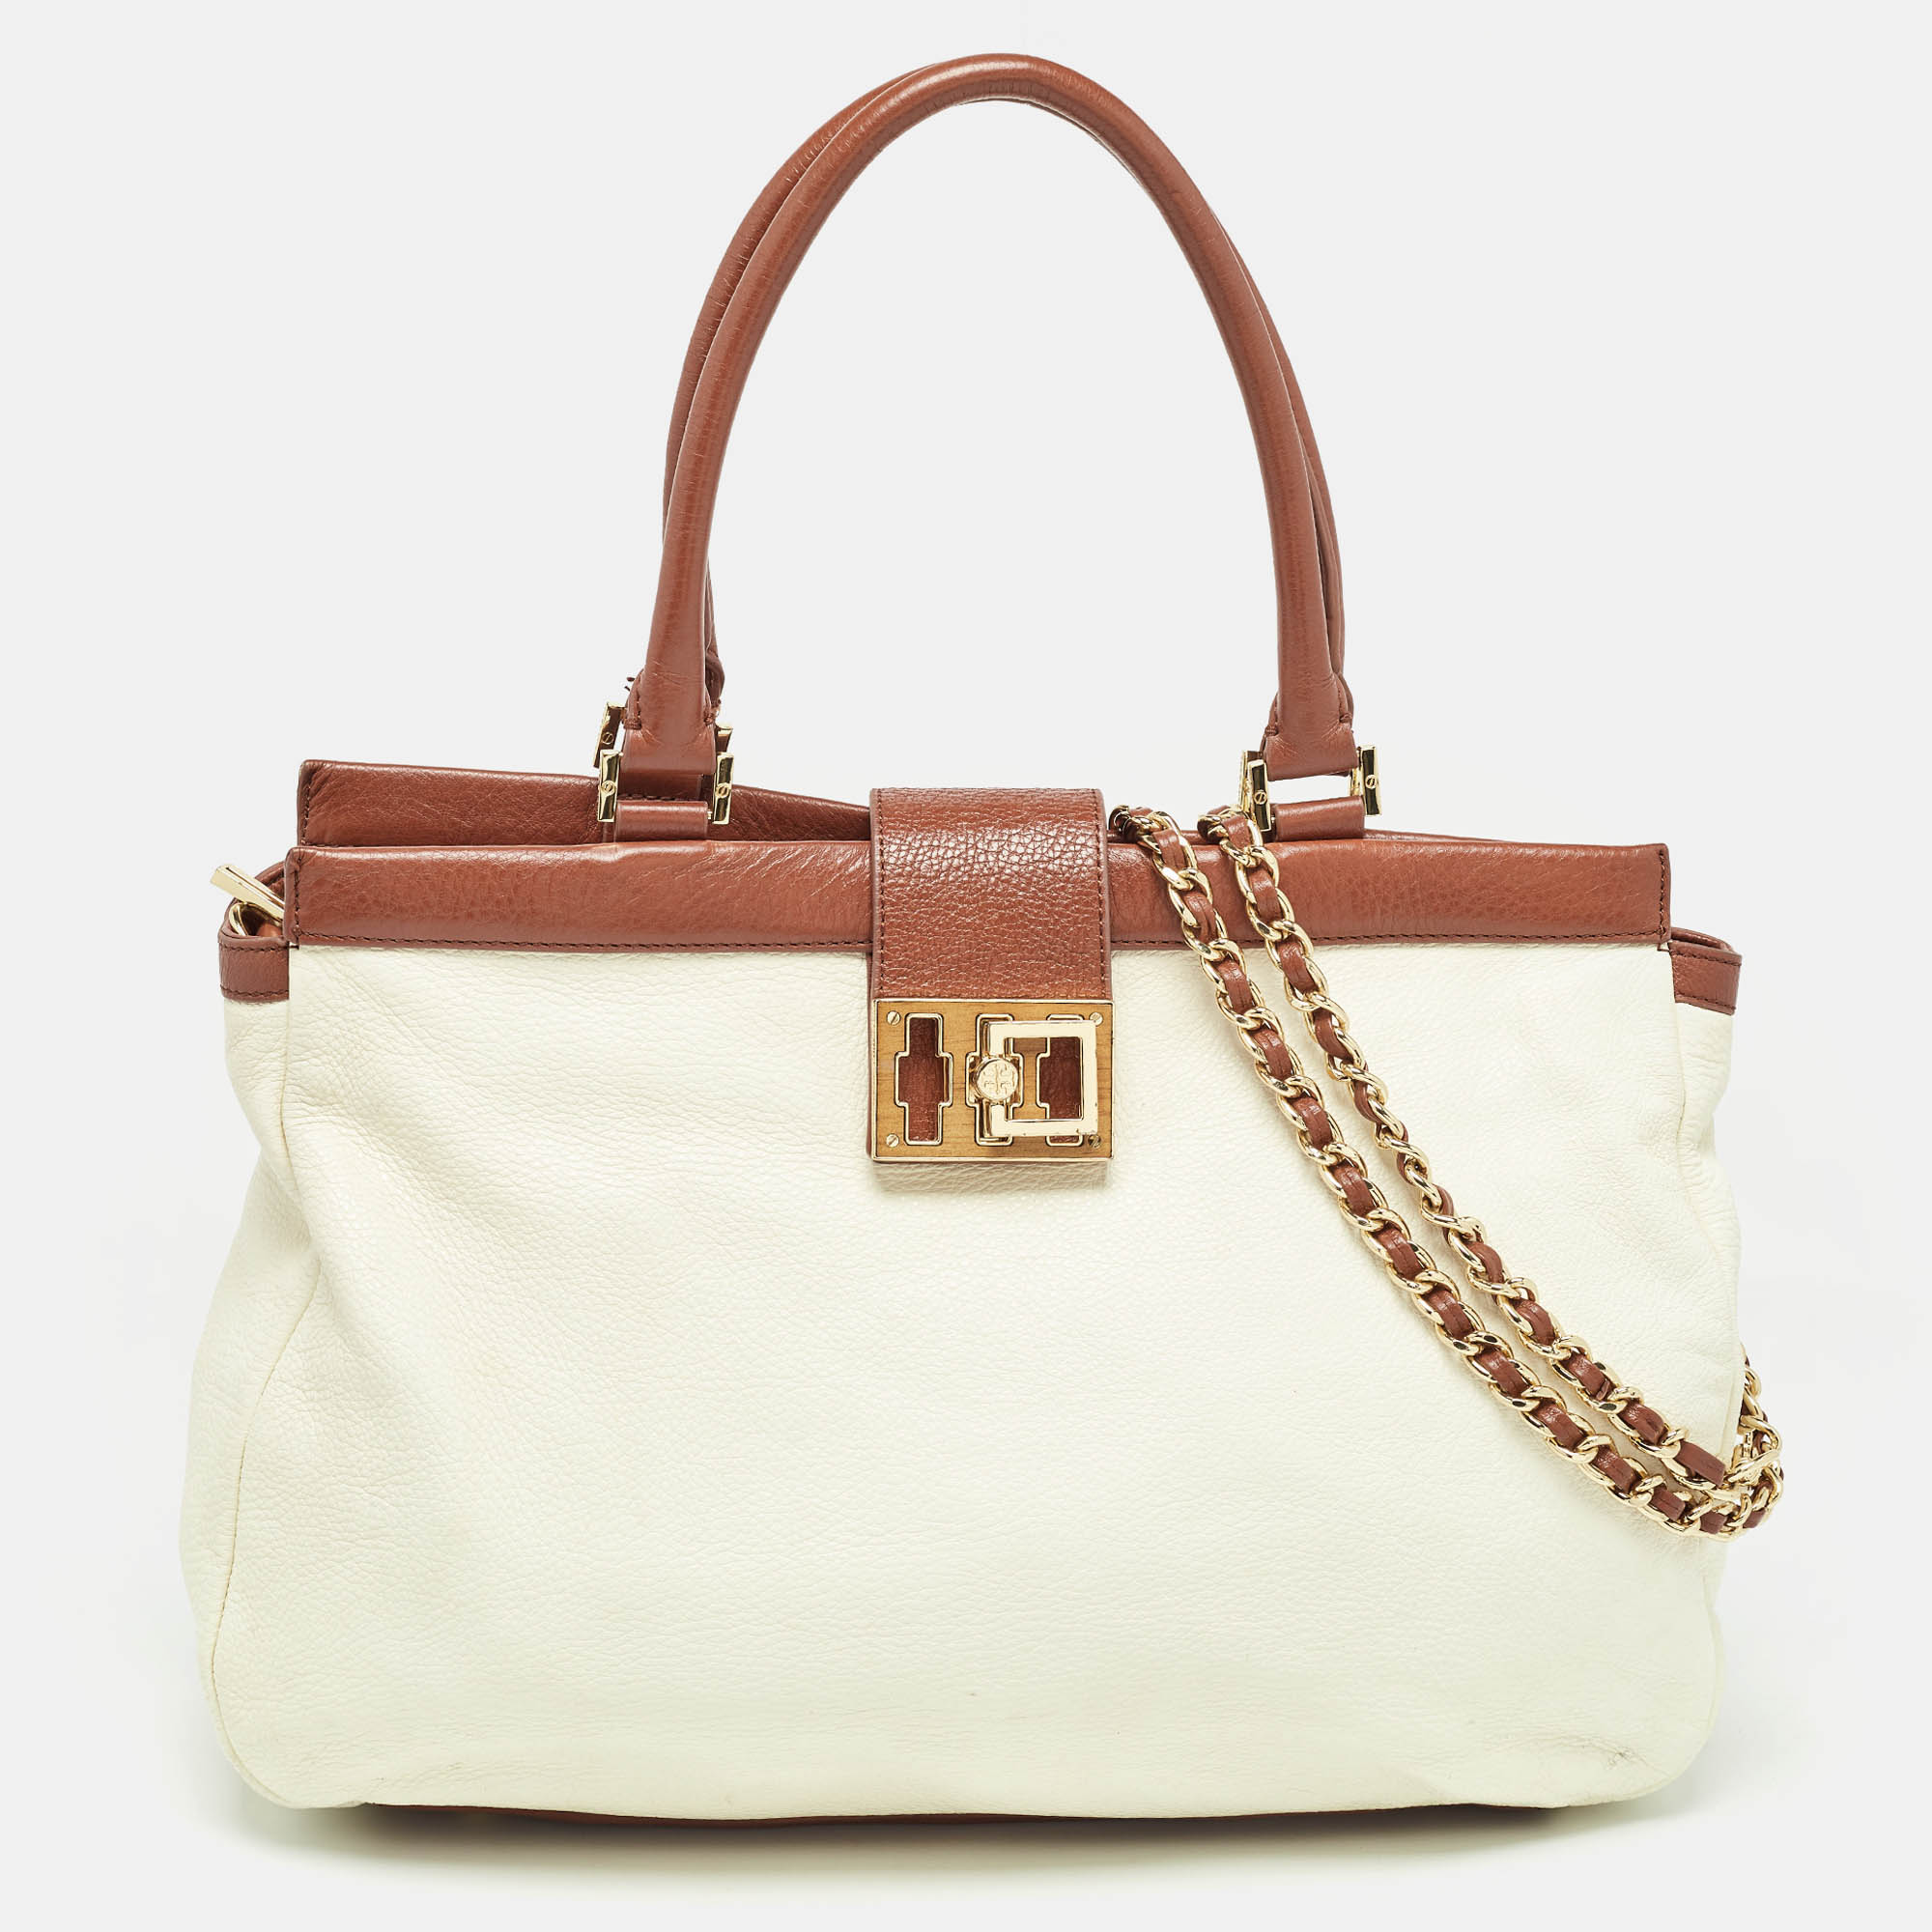 

Tory Burch Cream/Brown Leather Tote